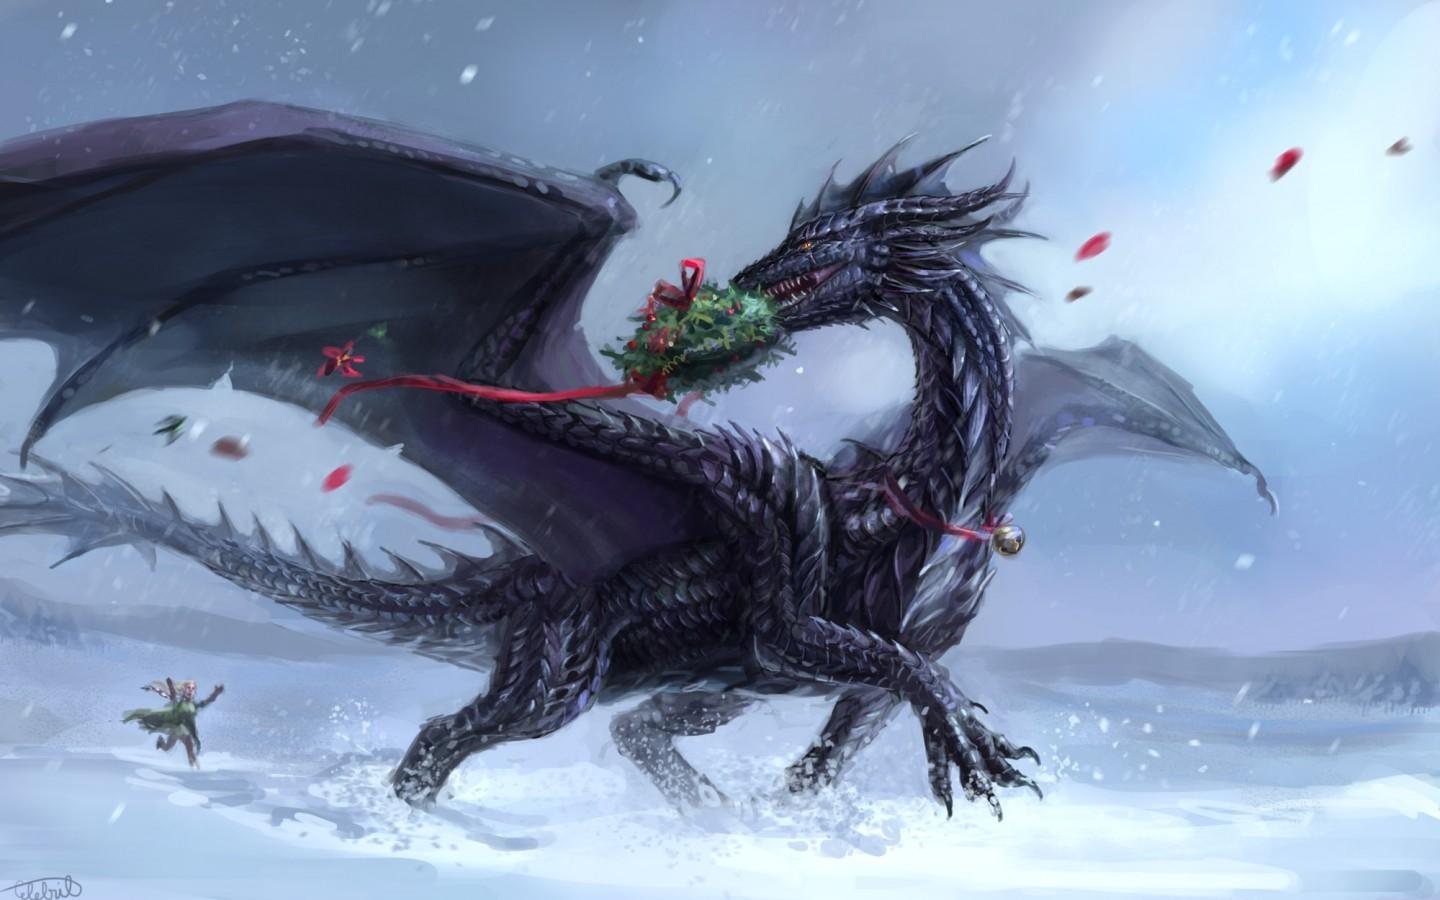 Download 1440x900 Dragon, Running, Creature, Snow, Wings